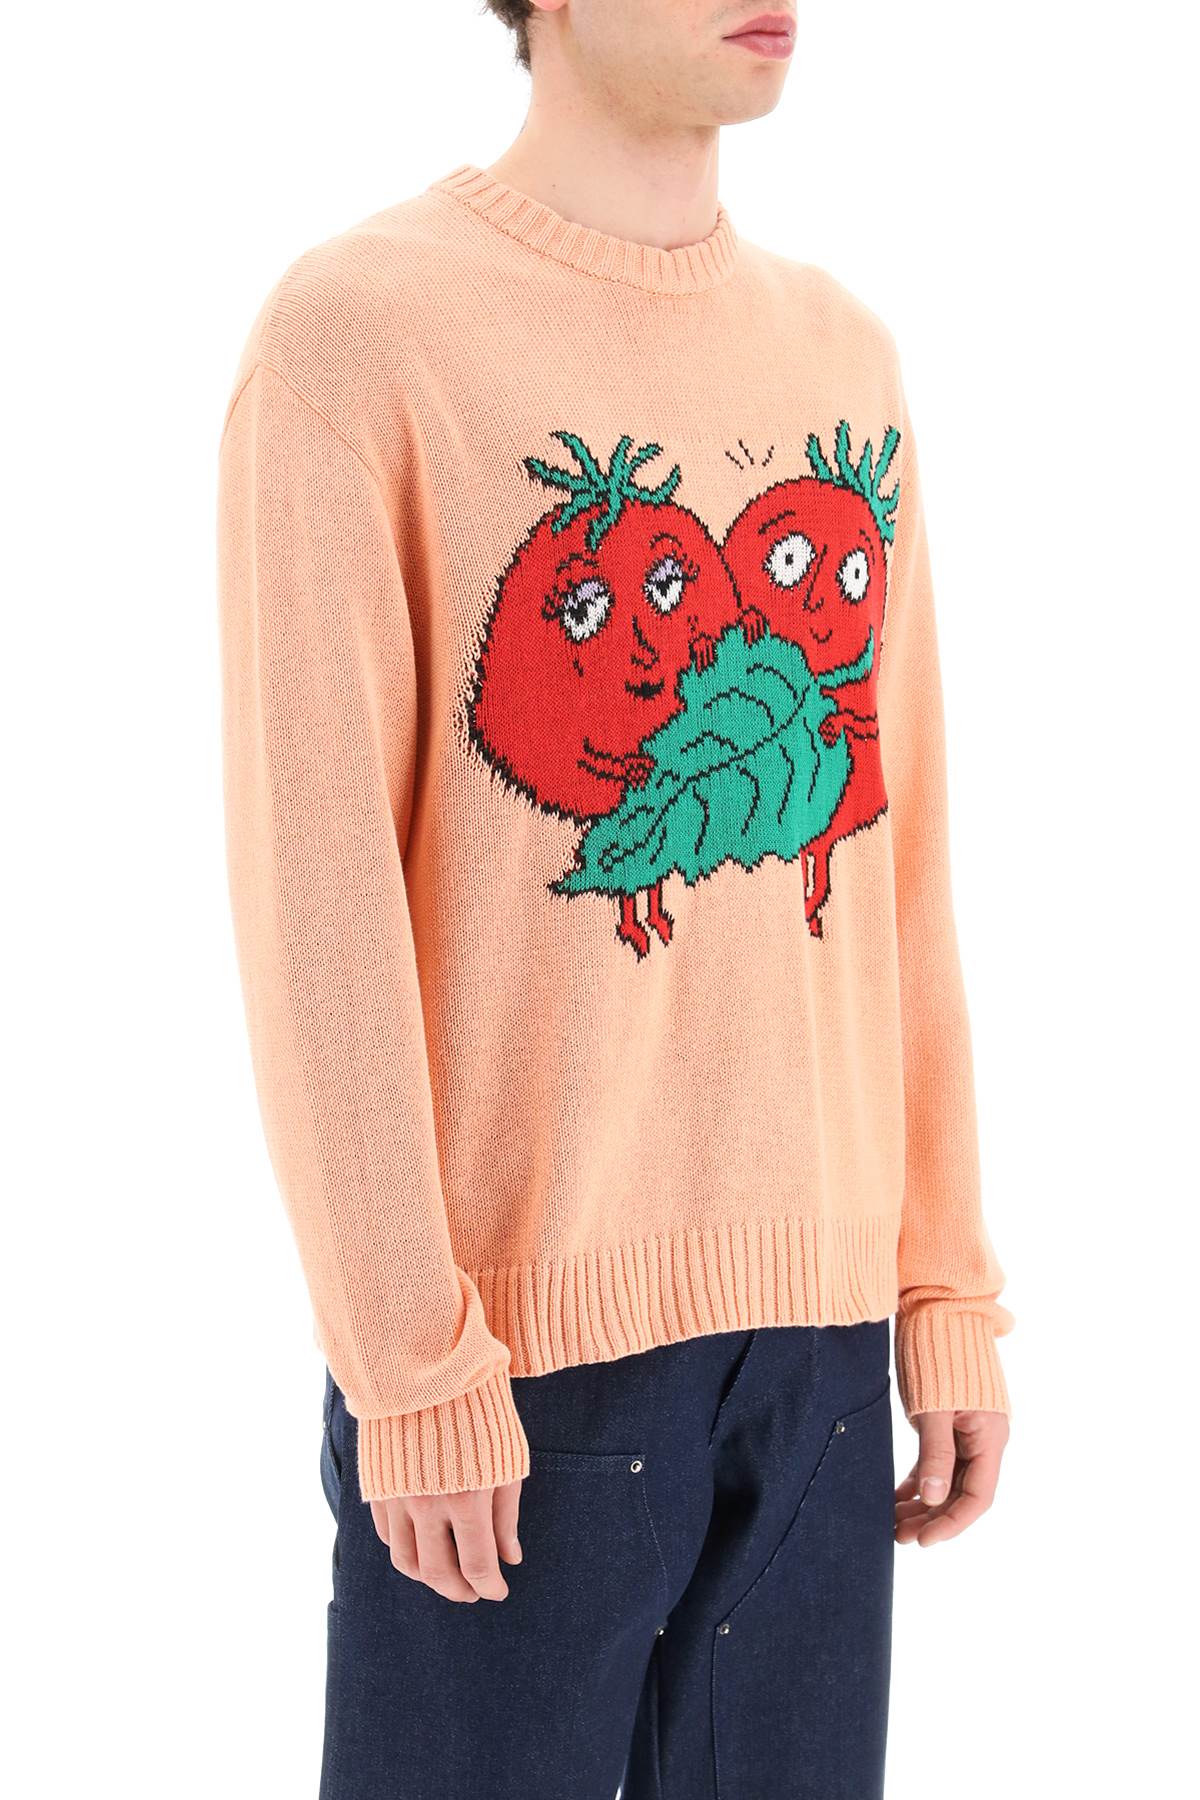 Sky High Farm 'Happy Tomatoes' Cotton Sweater   Pink